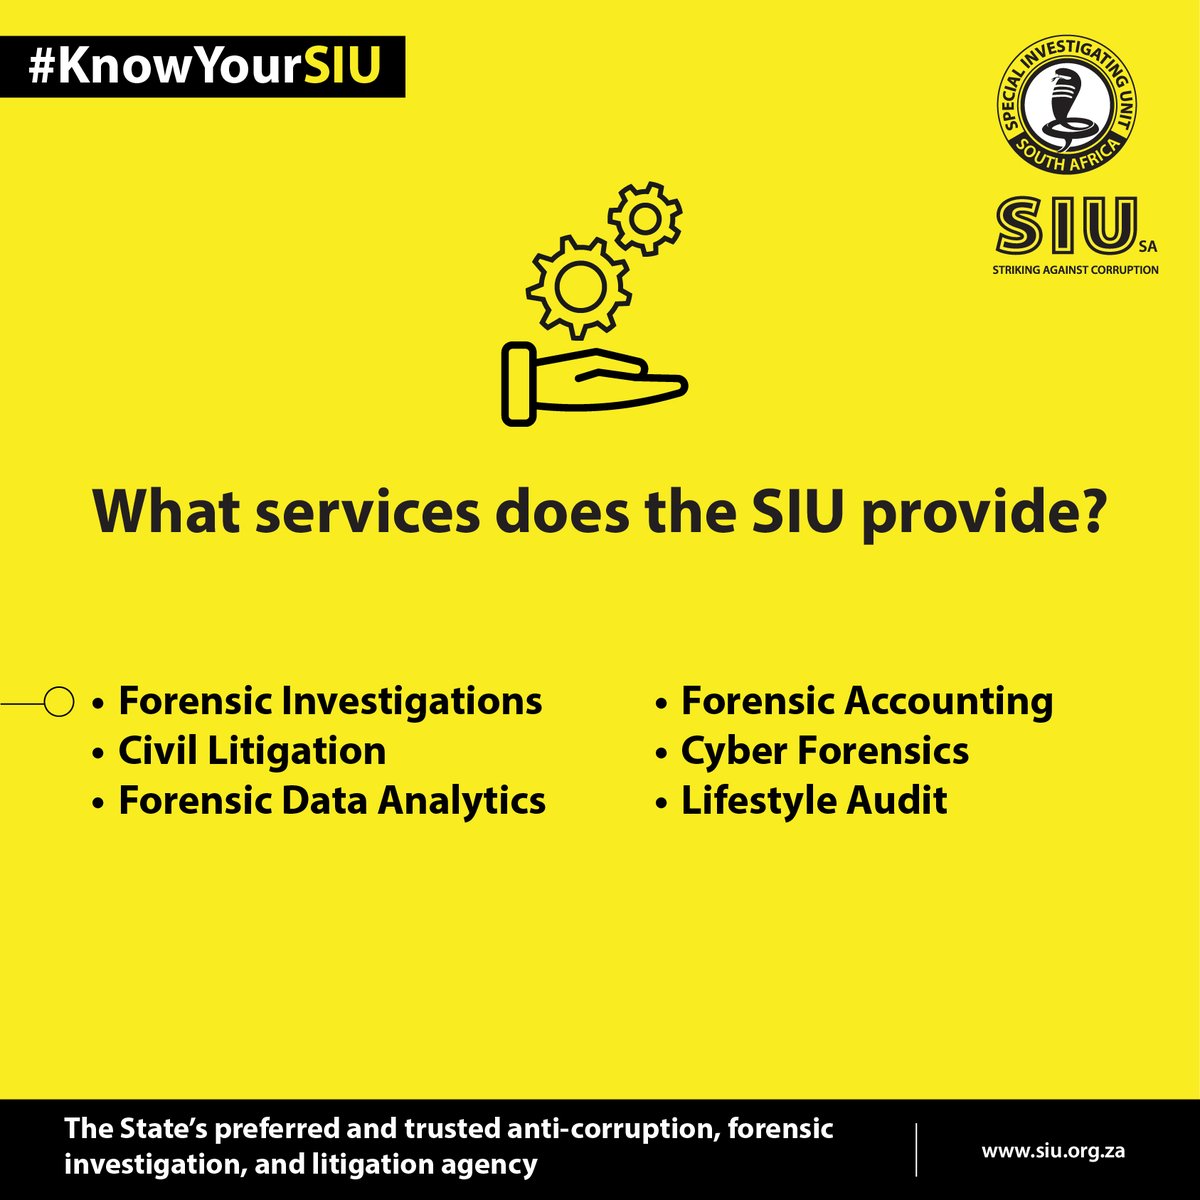 #KnowYourSIU|The vision of the SIU is to be the preferred and trusted anti-corruption, forensic investigation and litigation agency. These are the services the SIU offers the State.